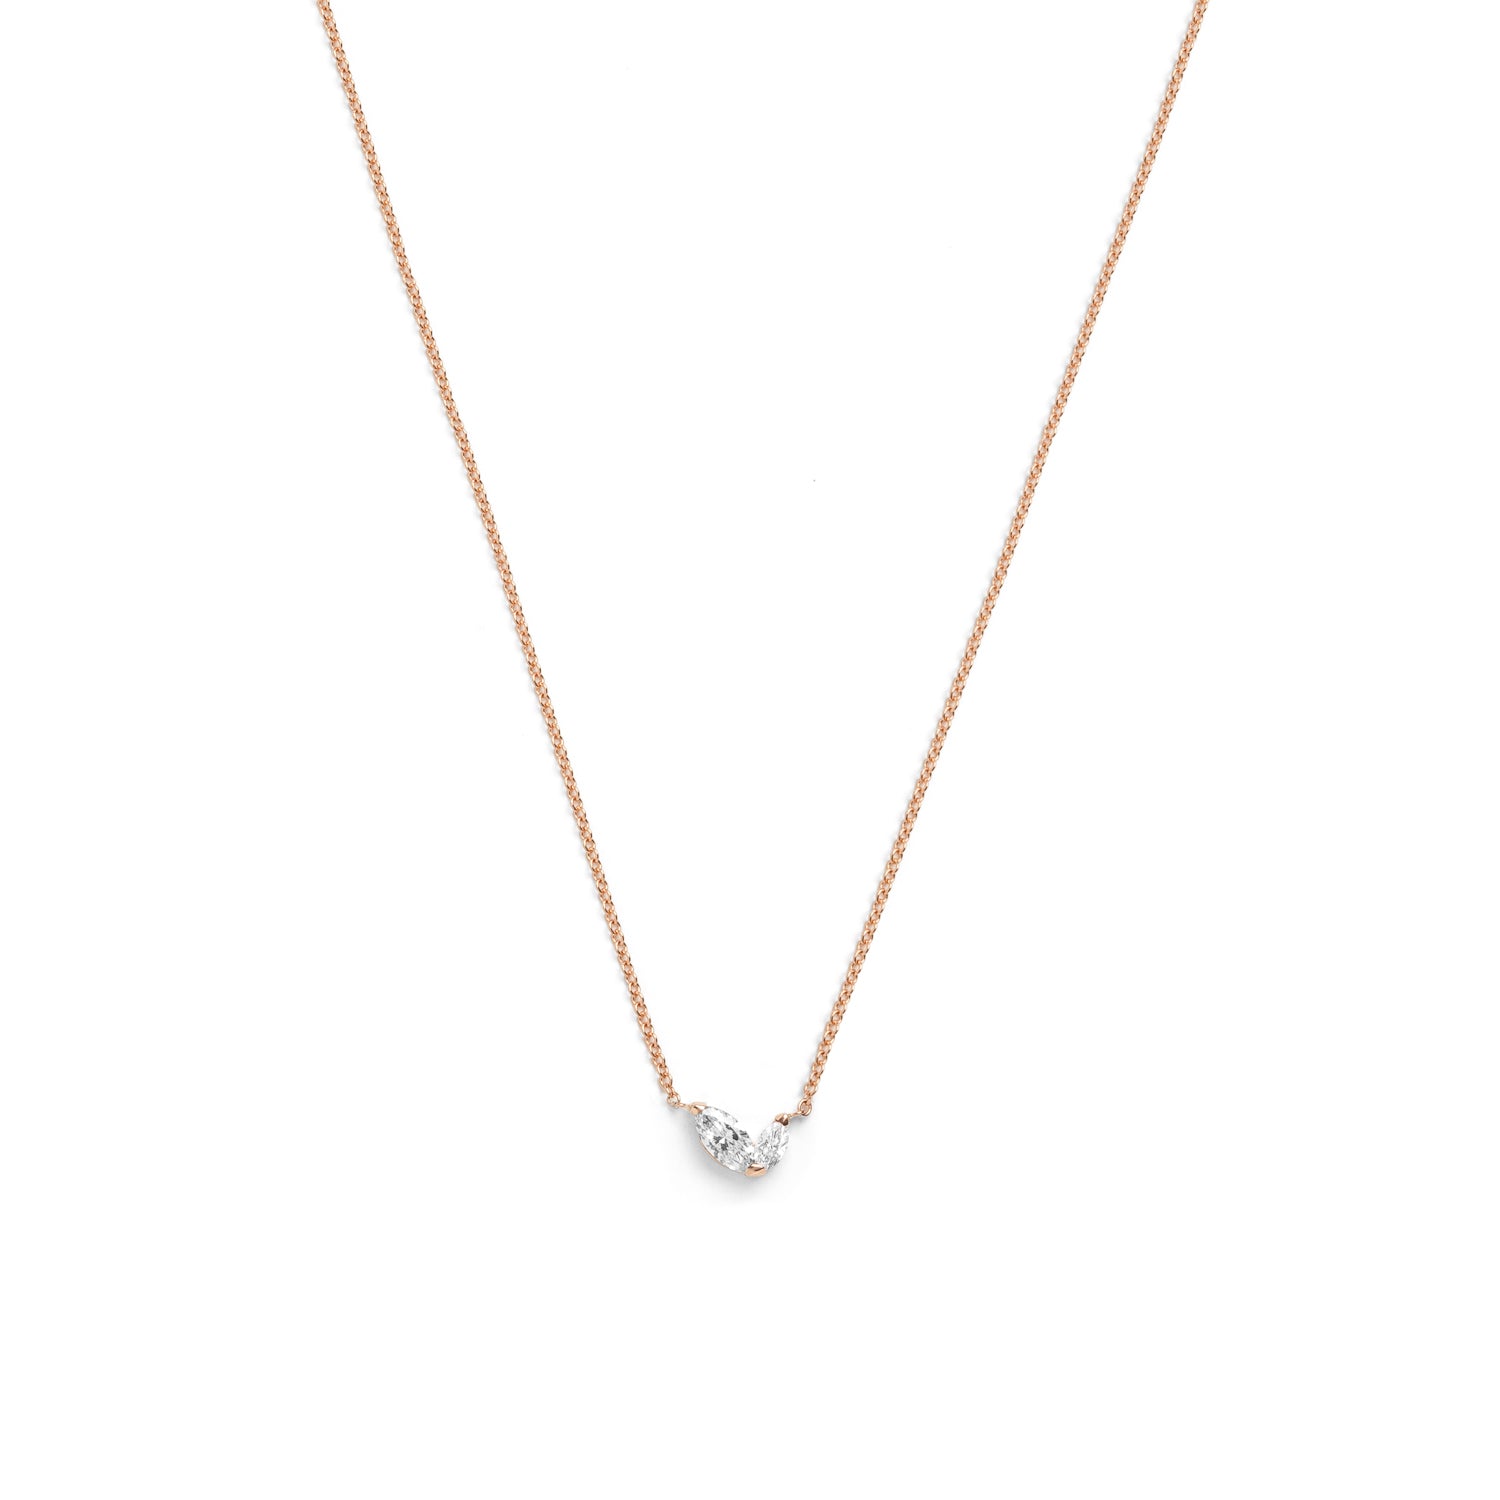 Selin Kent 14K Defne Necklace with Two Marquise White Diamonds